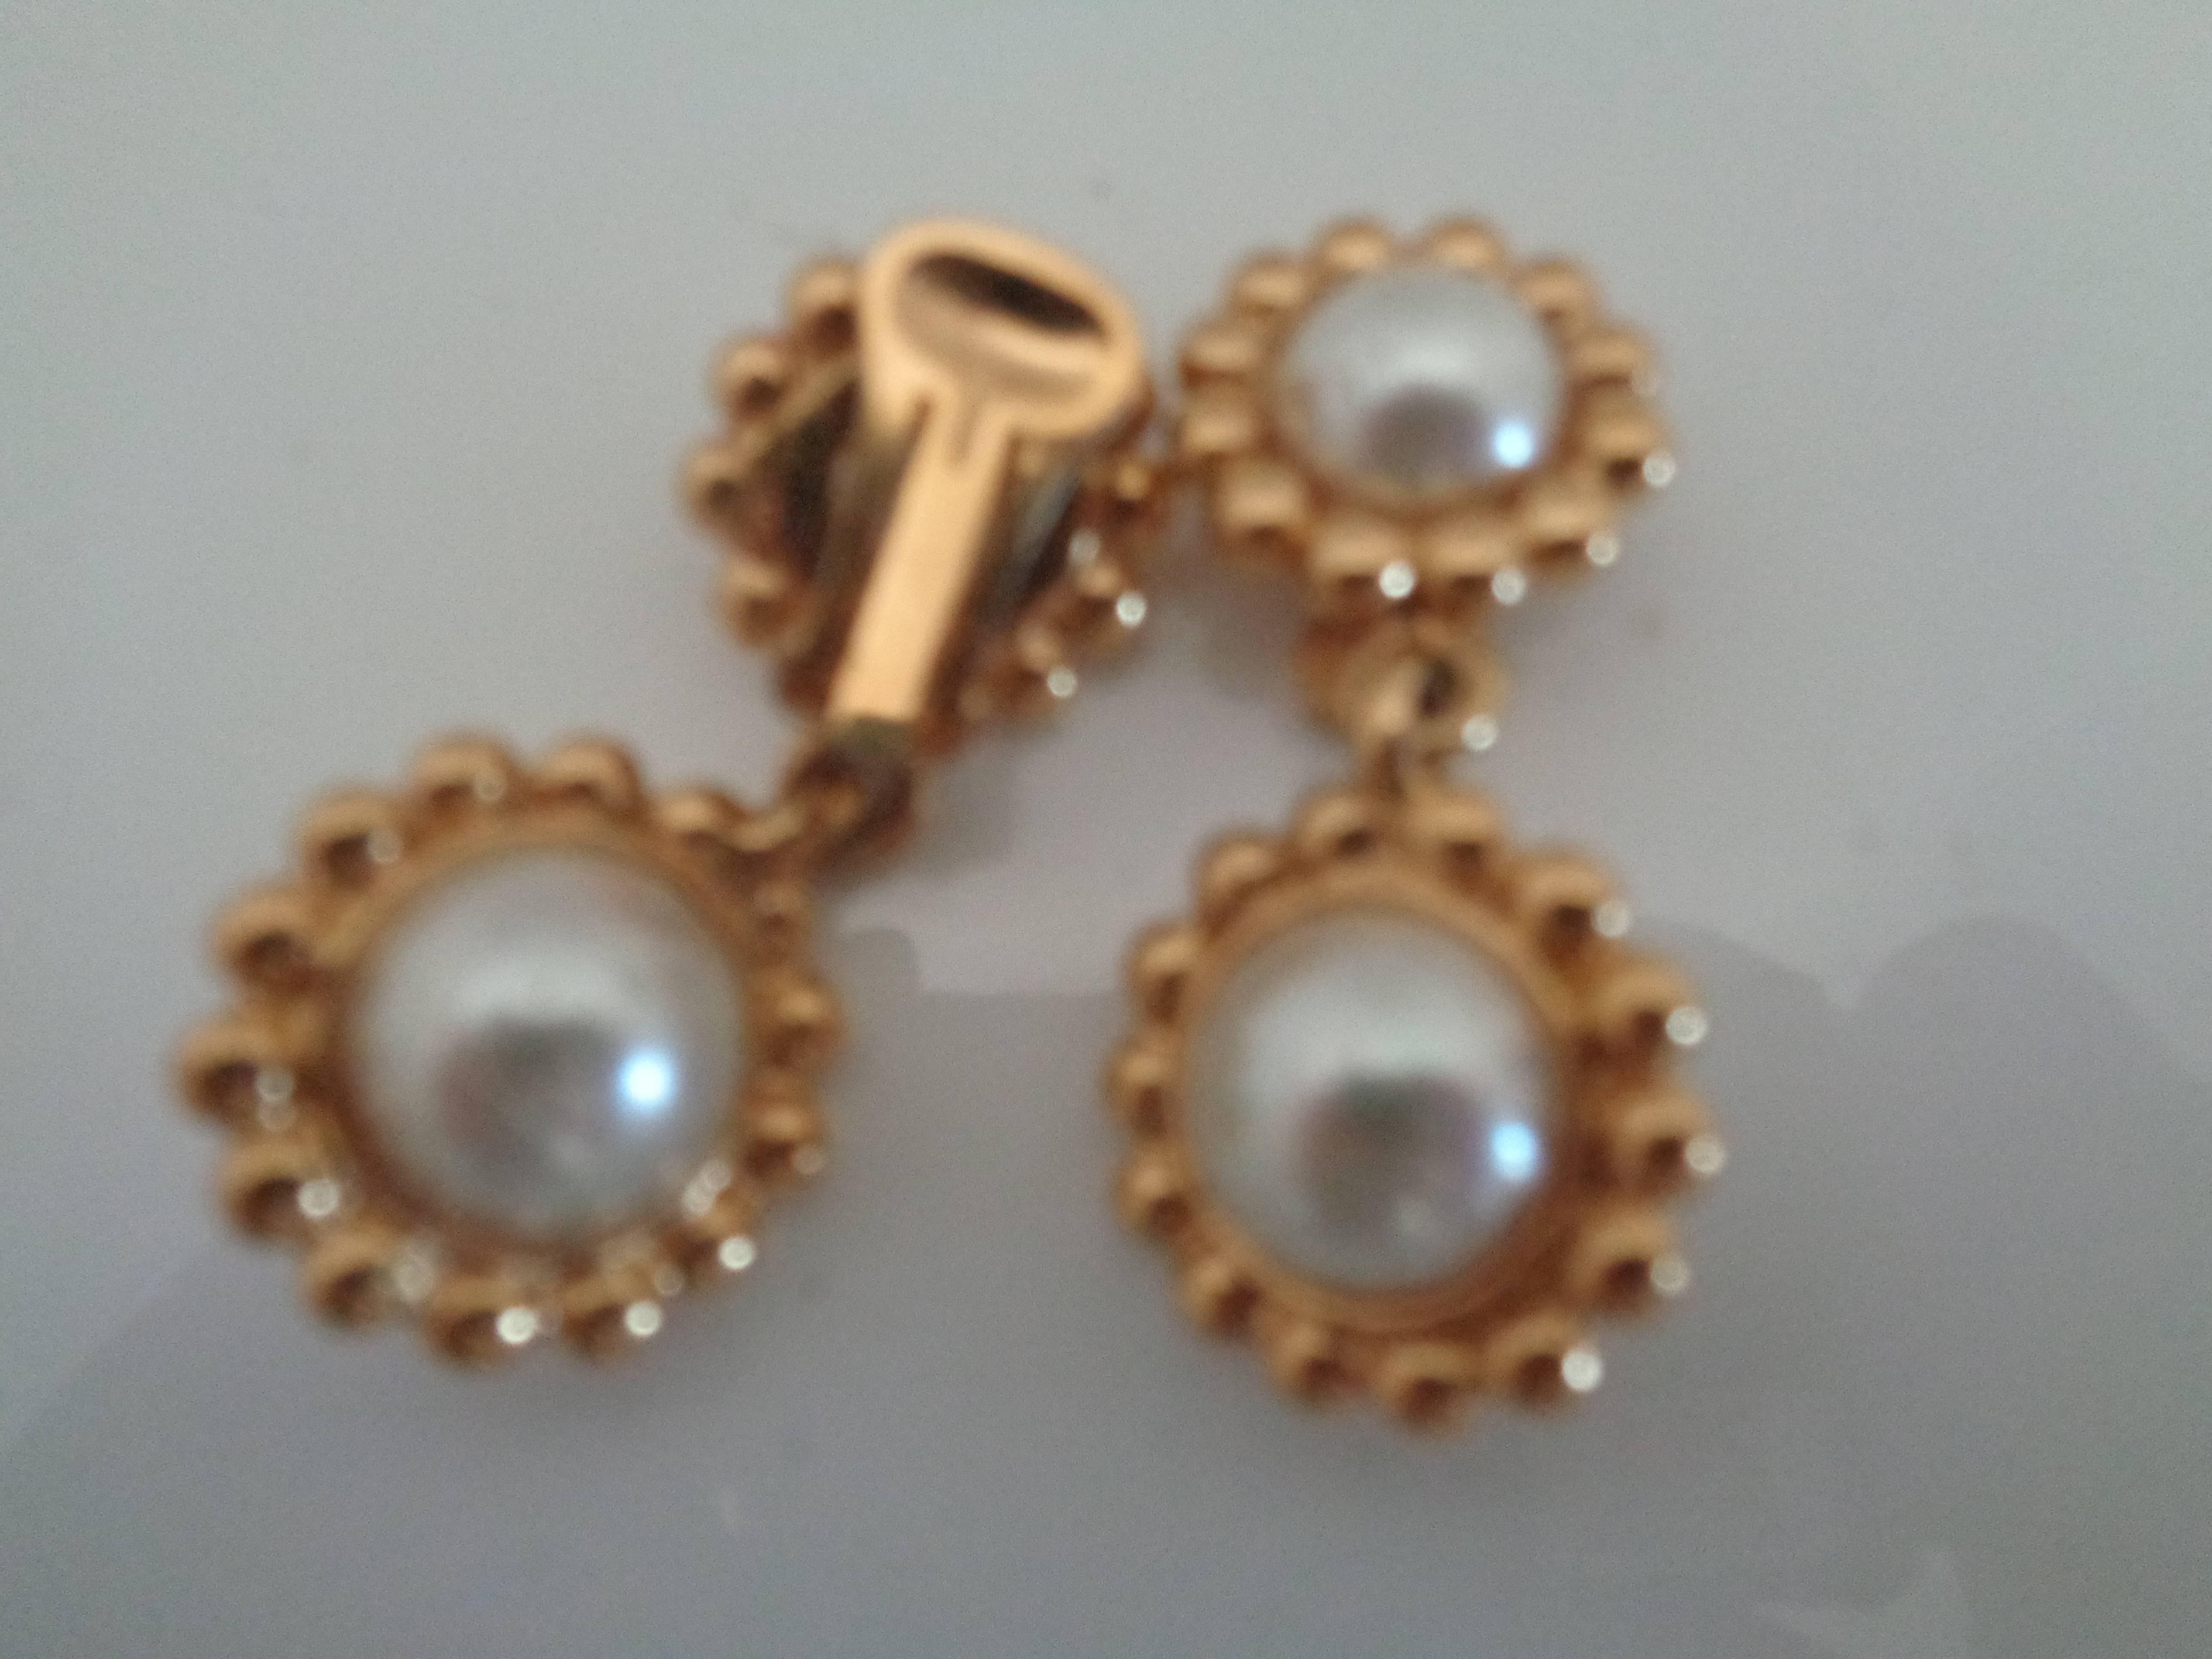 1990s Gold Tone Pendant with White Faux Pearls clip on earrings
Measurements: 5 cm x 2 cm